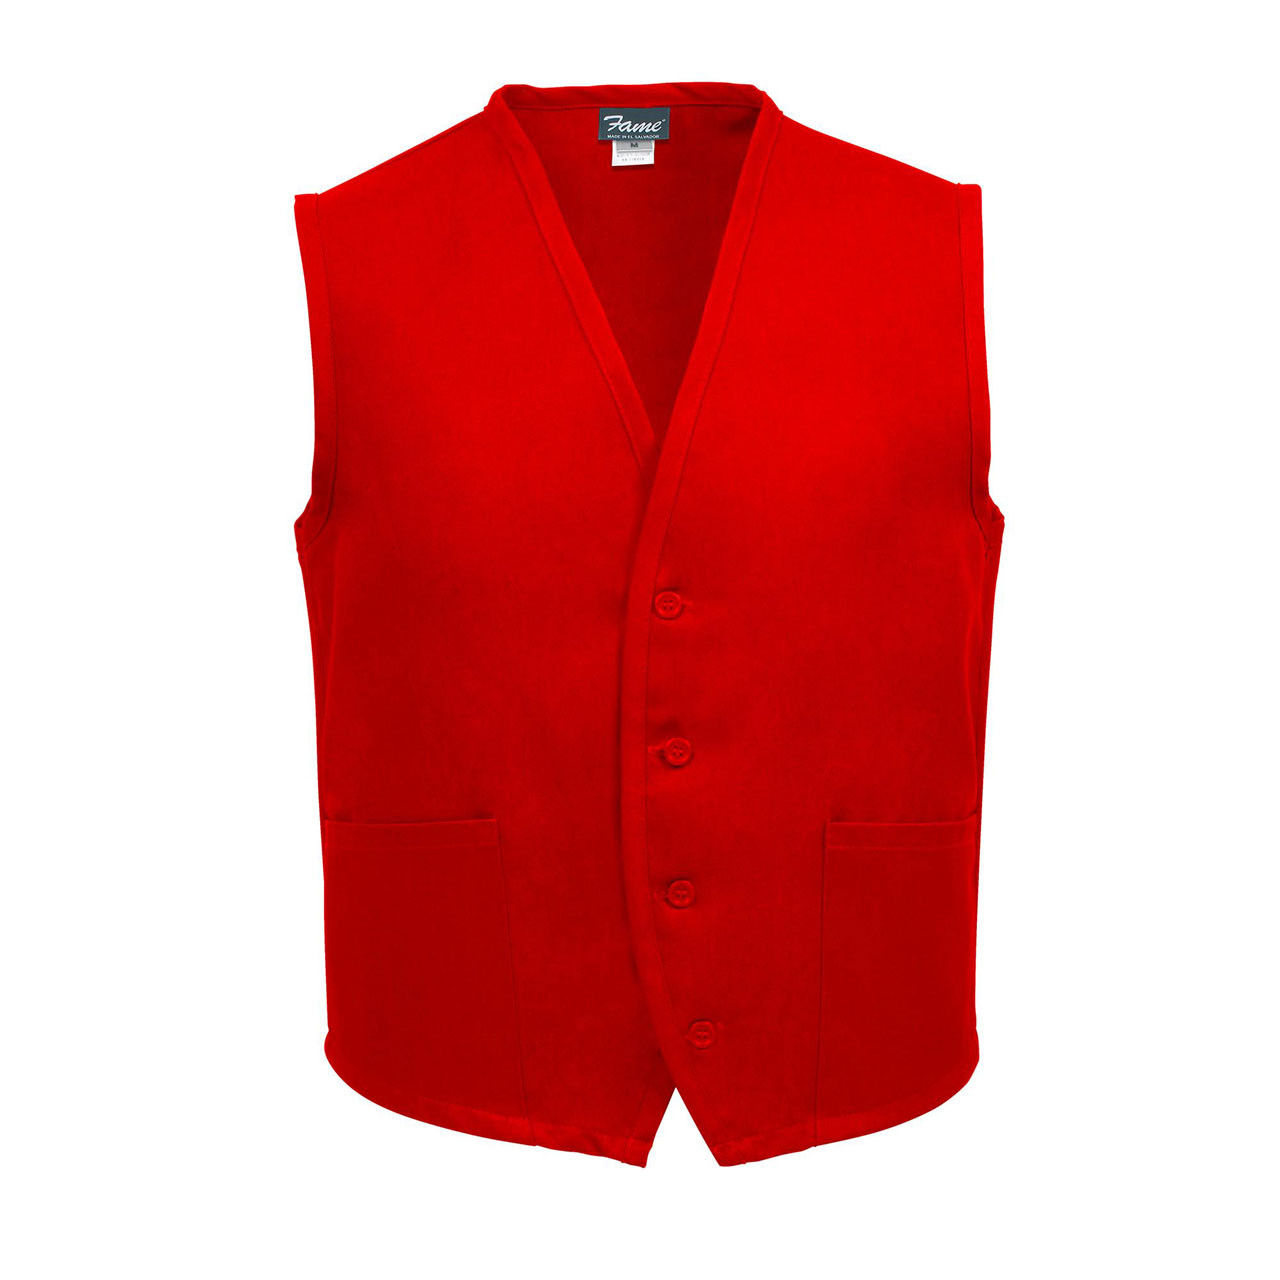 In the red vest, how does the closure of the Unisex Uniform Vest work?